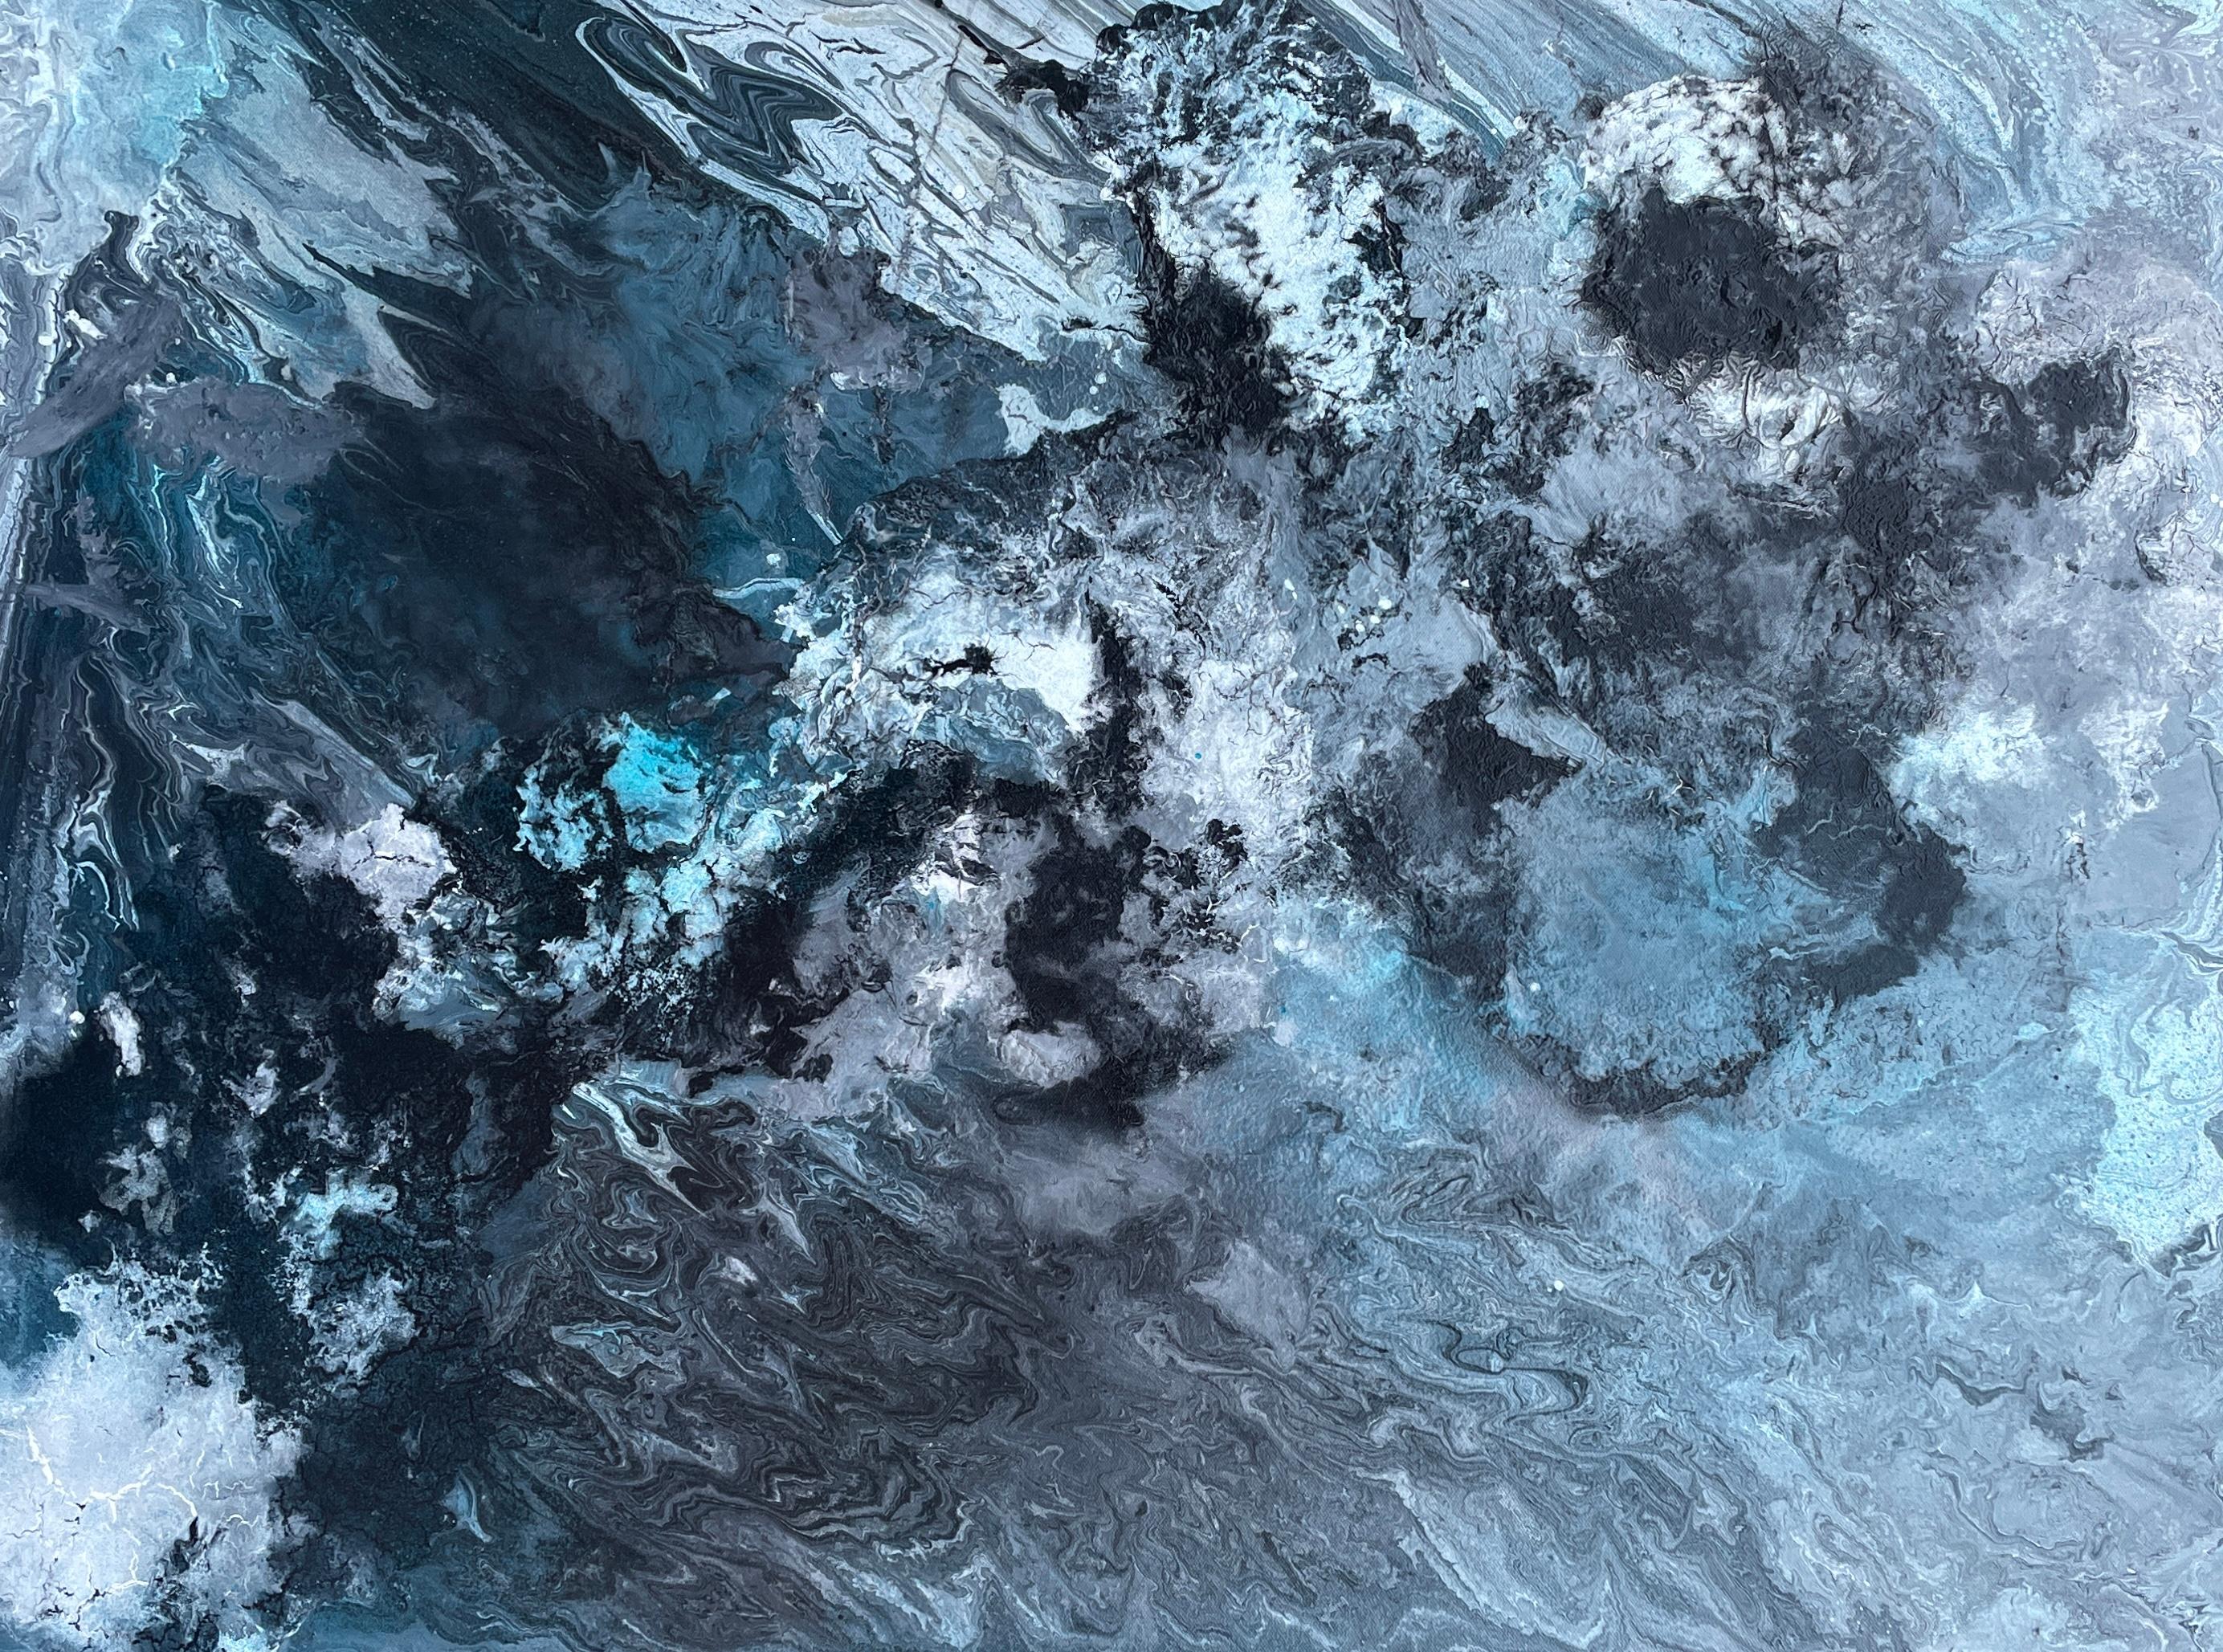 "Incoming Tide" by Lori Poncsak is a striking 30" x 40" acrylic on canvas that embodies the dynamic forces of nature captured through abstract expressionism. The artwork features a rich palette of deep blues, turquoise, and swirling grays that evoke